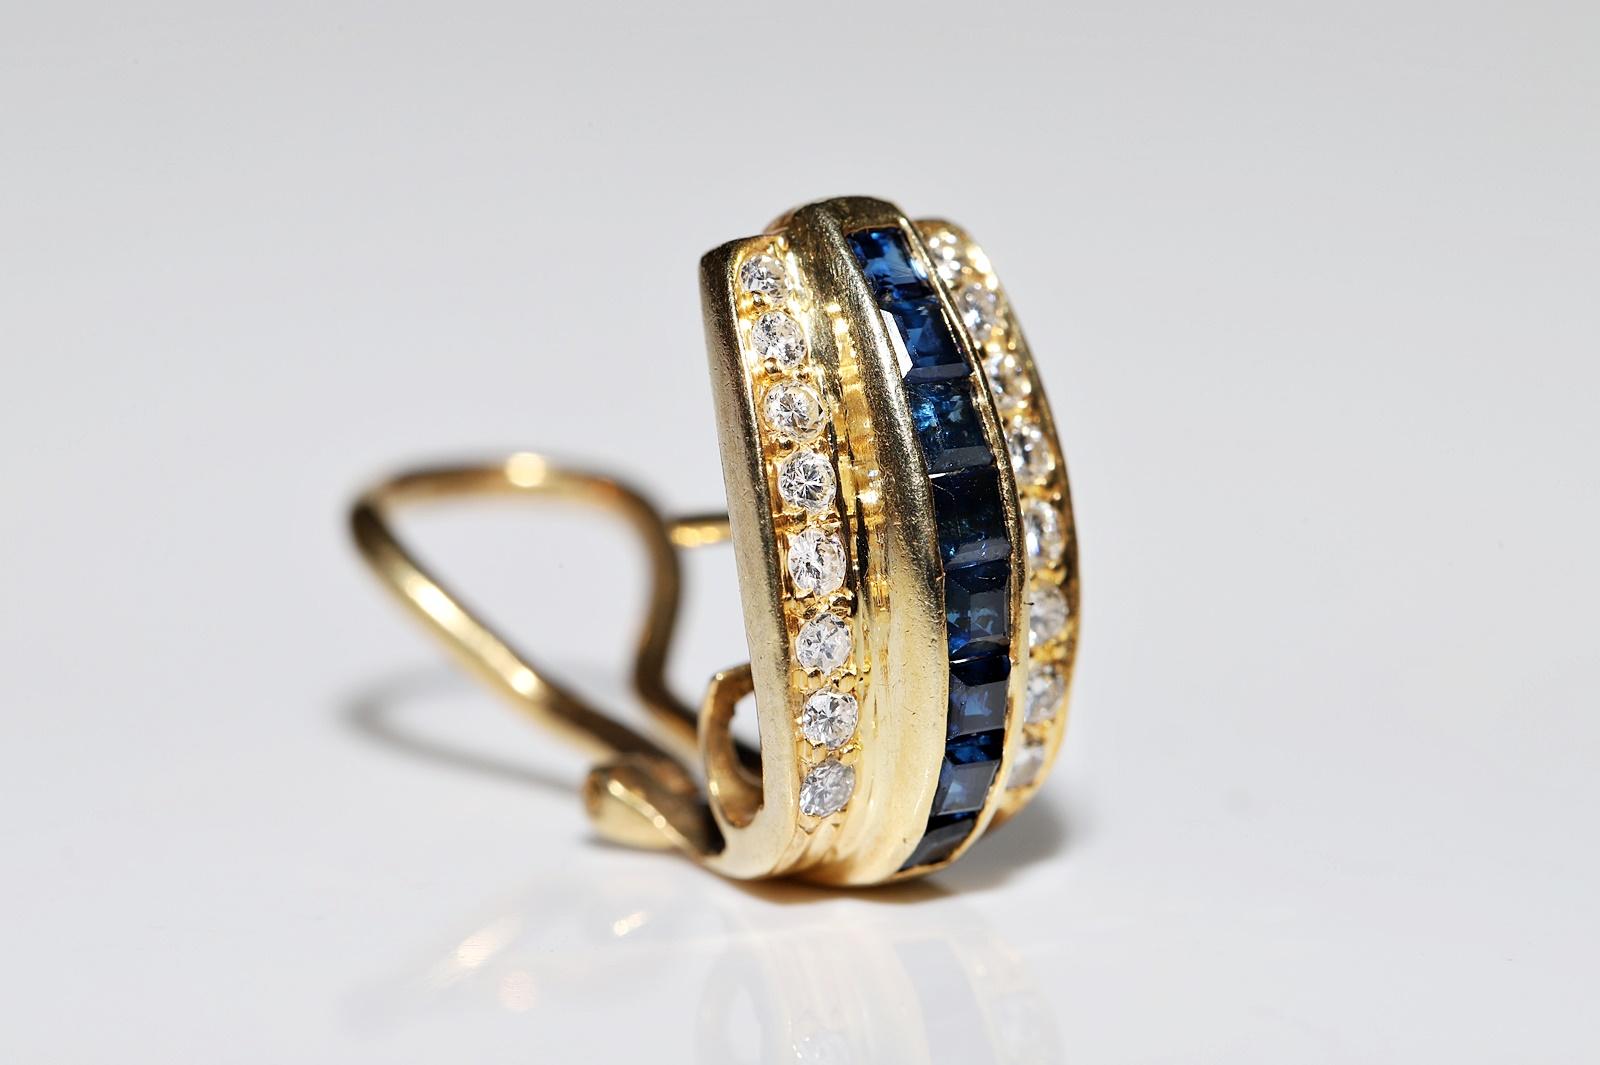 Brilliant Cut Vintage Circa 1980s 18k Gold Natural Diamond And Caliber Sapphire Earring For Sale